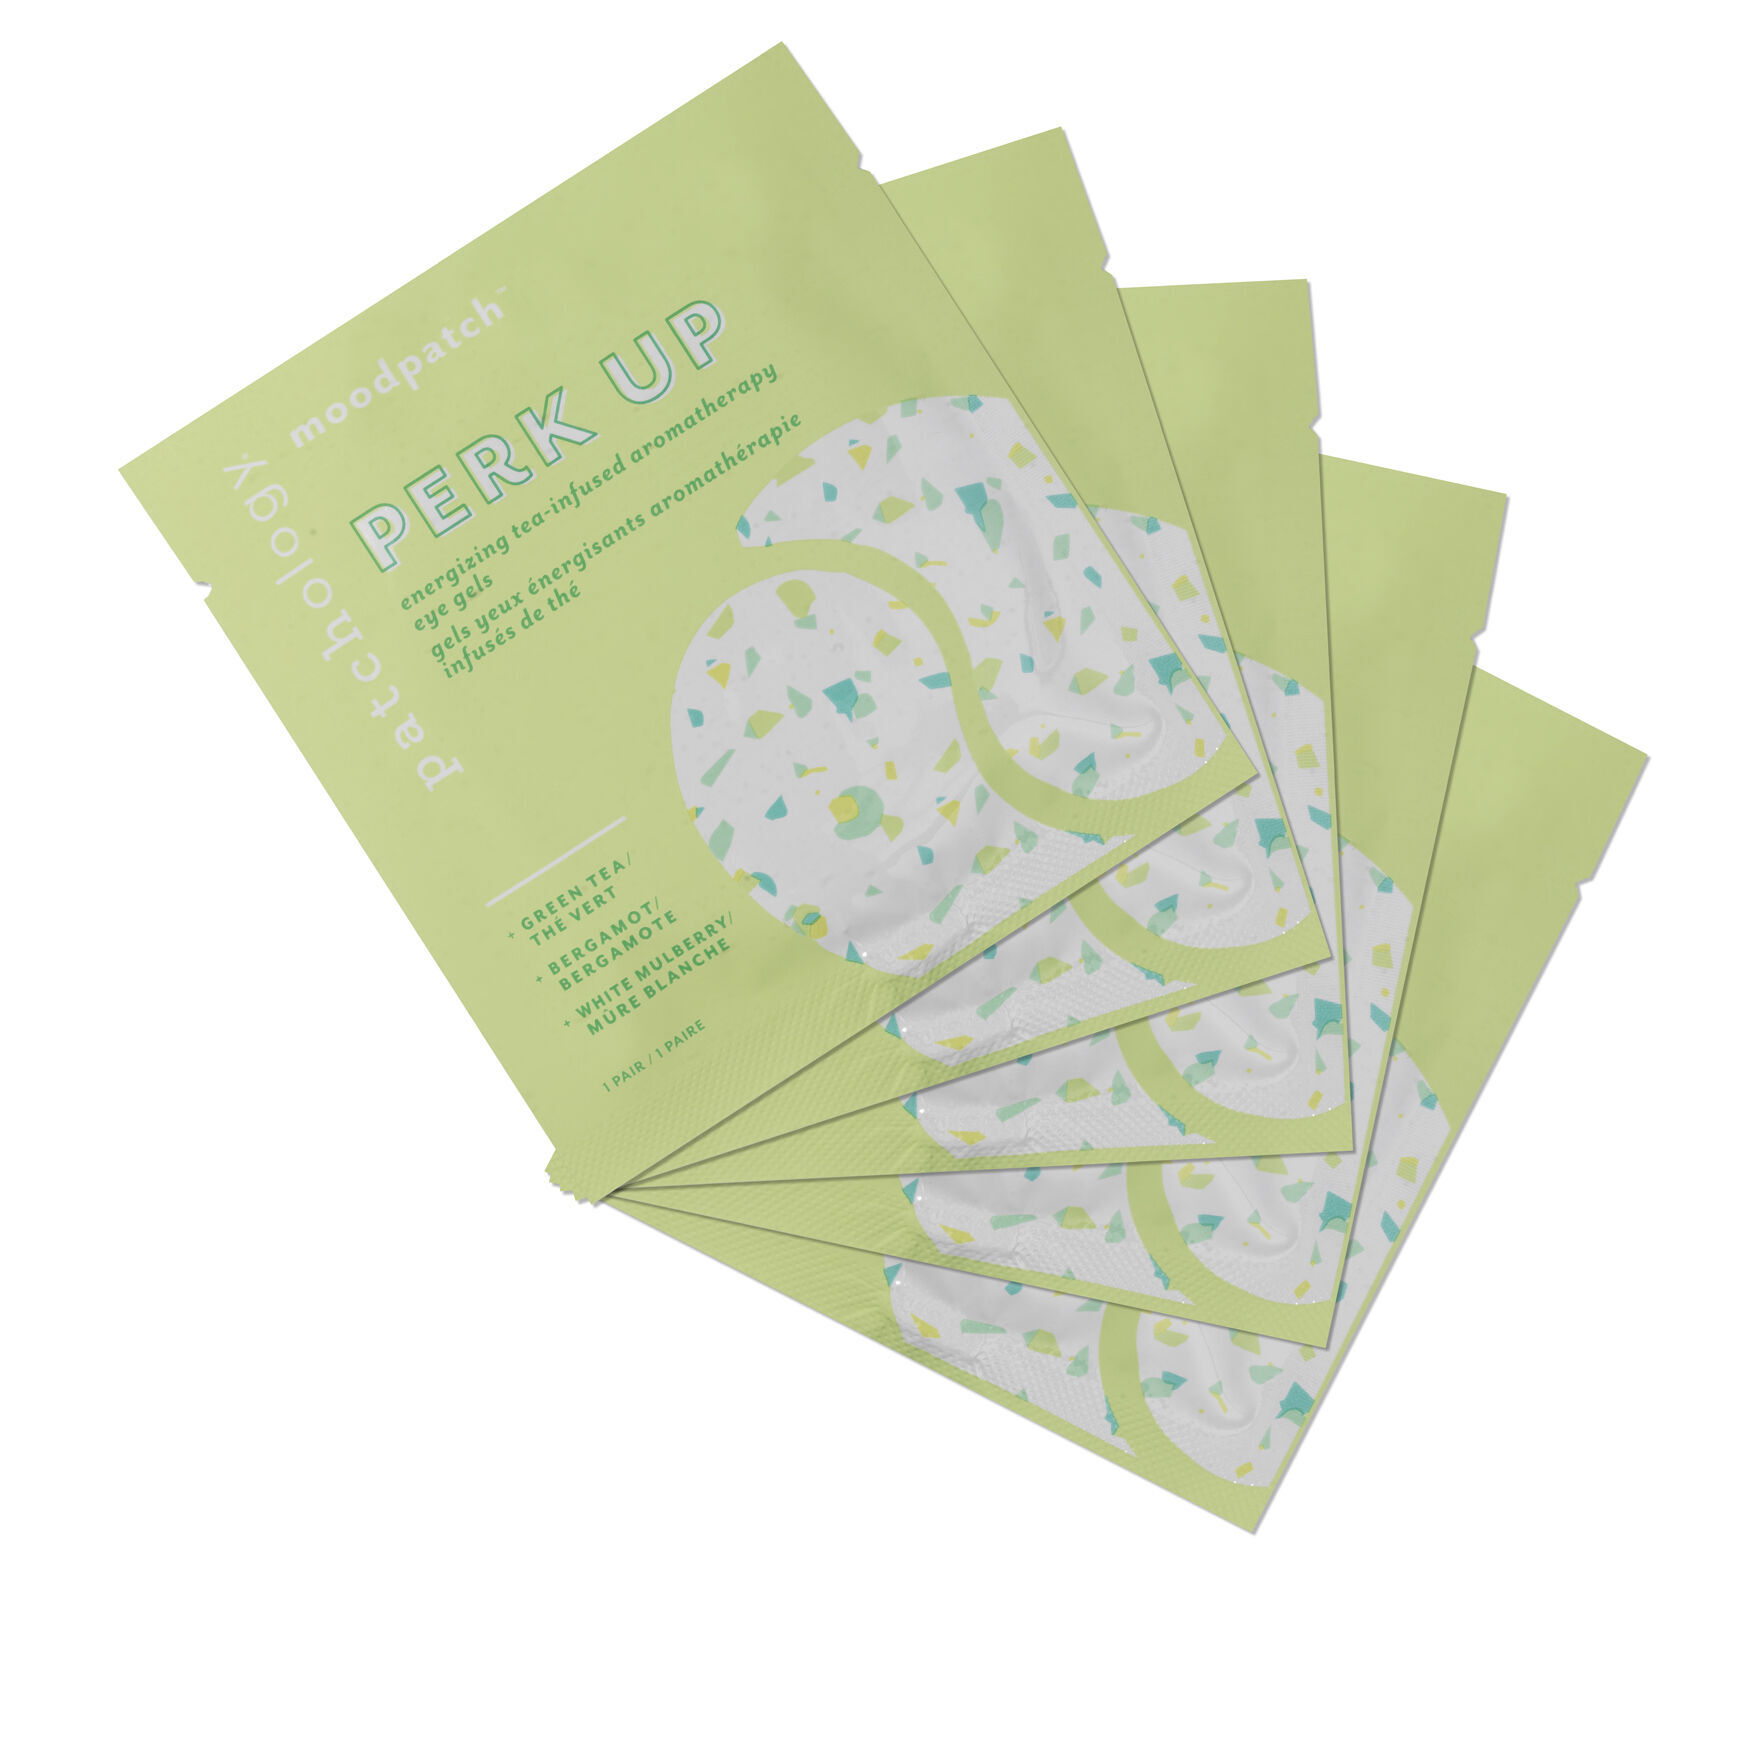 Patchology - Moodpatch "Perk Up" Energizing Tea-Infused Aromatherapy Eye Gels